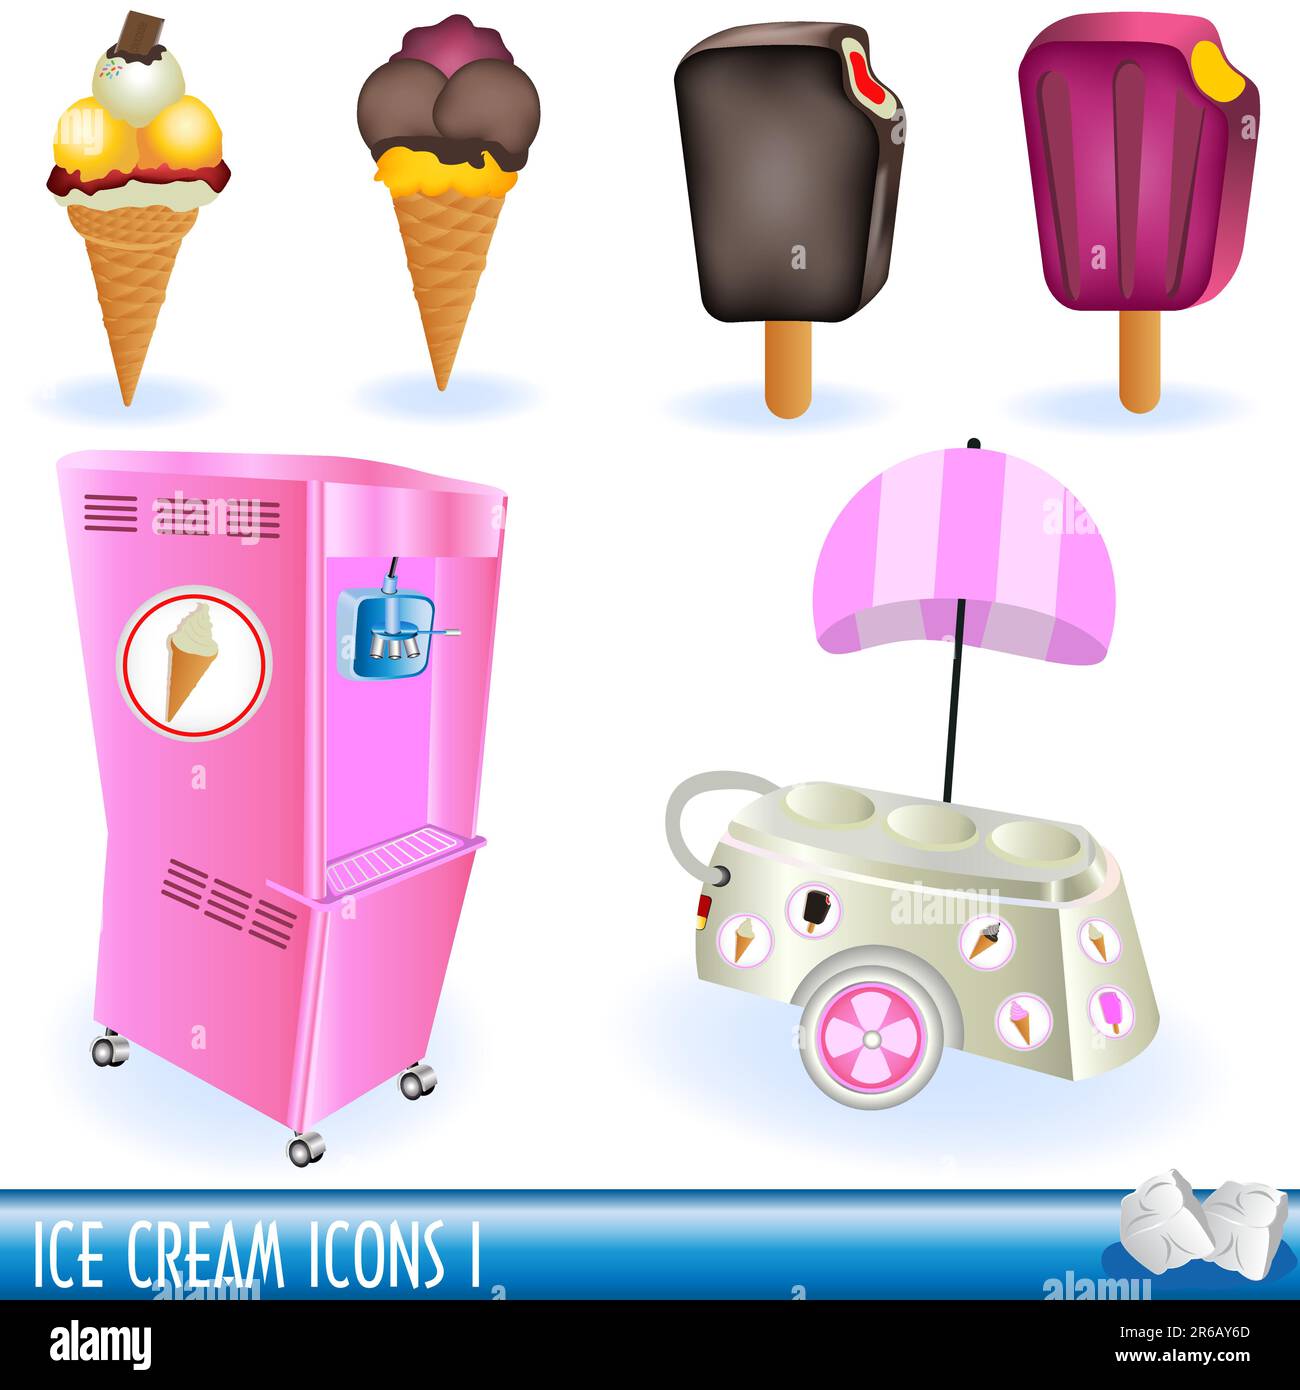 A collection of ice cream icons, part 1 Stock Vector